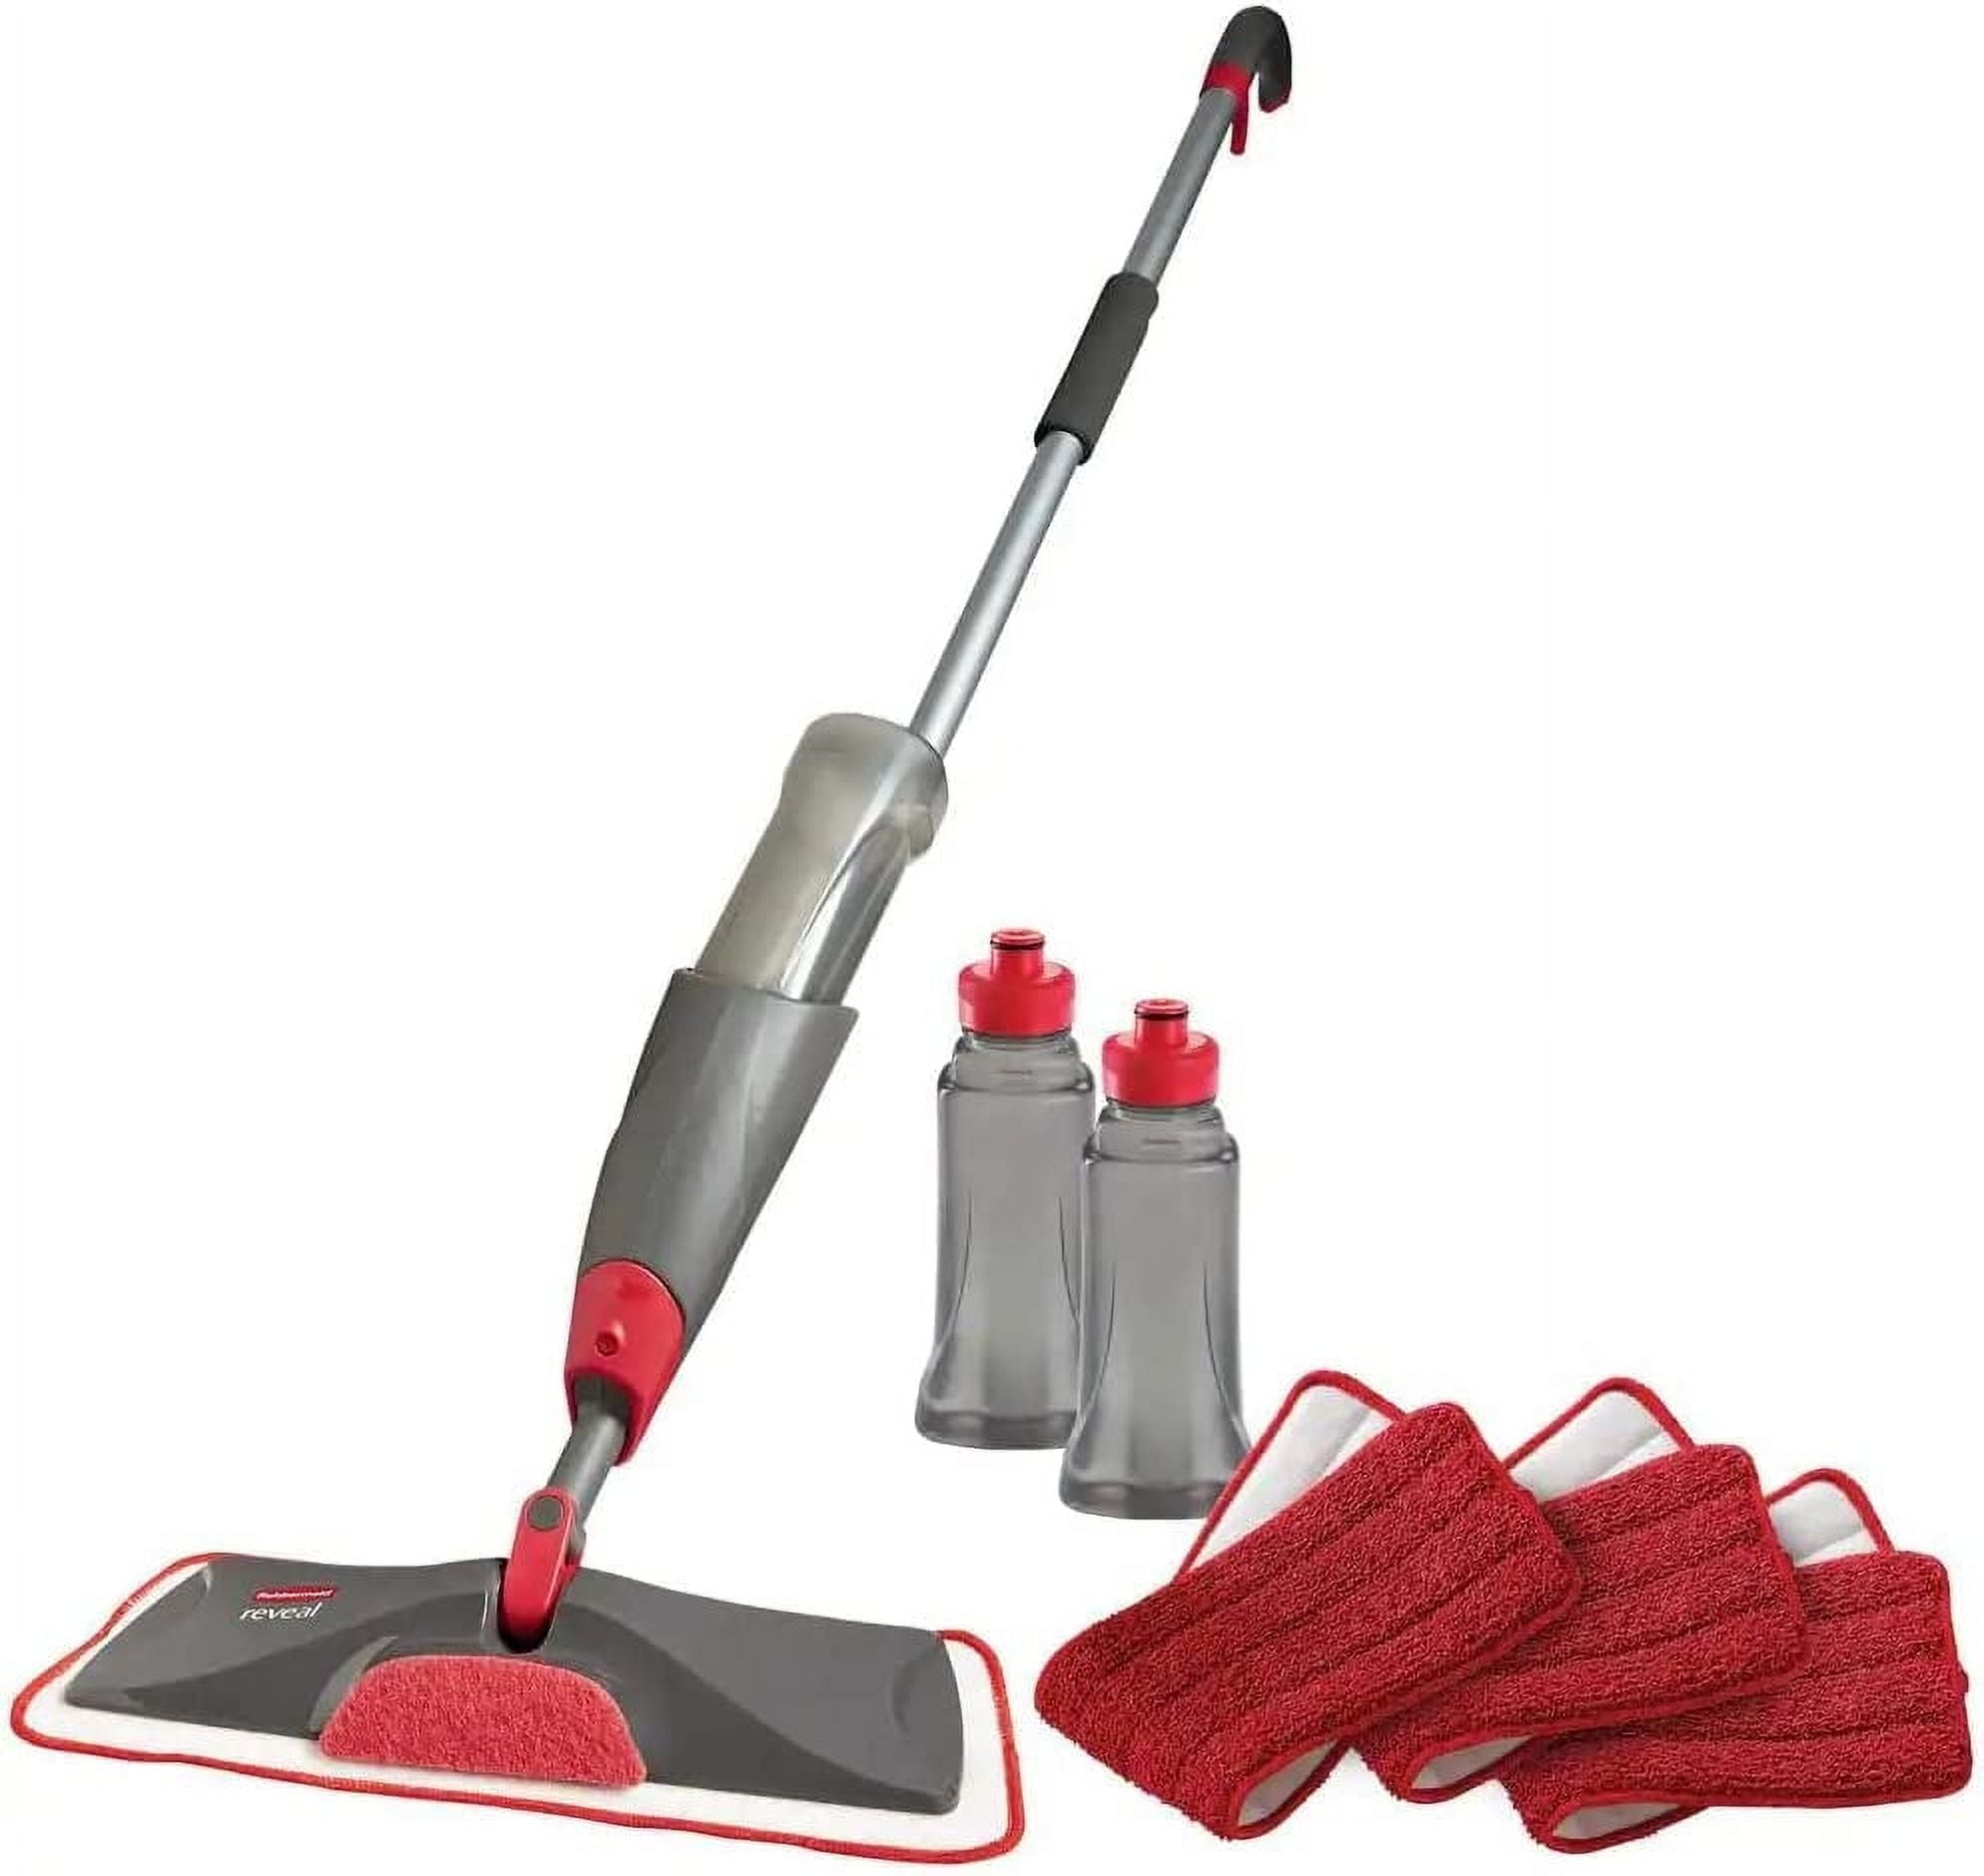 Rubbermaid Reveal Spray Microfiber Floor Cleaning Kit for Laminate &  Hardwood Floors, Spray Mop with Reusable Washable Pads, Commercial for Sale  in Los Angeles, CA - OfferUp